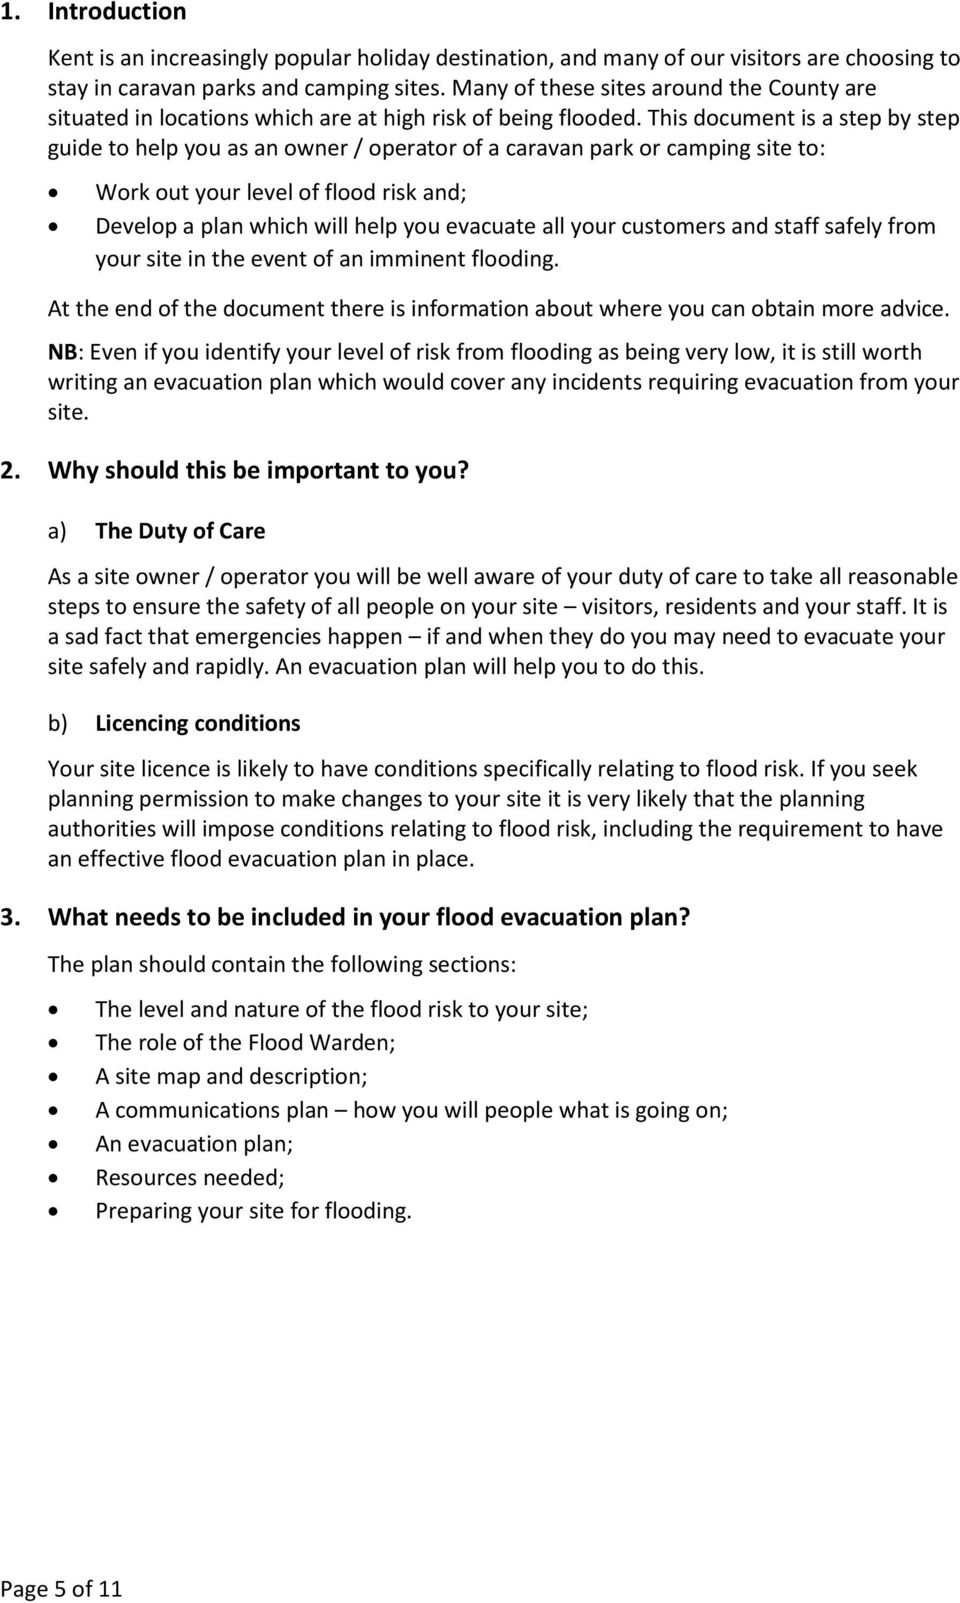 This document is a step by step guide to help you as an owner / operator of a caravan park or camping site to: Work out your level of flood risk and; Develop a plan which will help you evacuate all